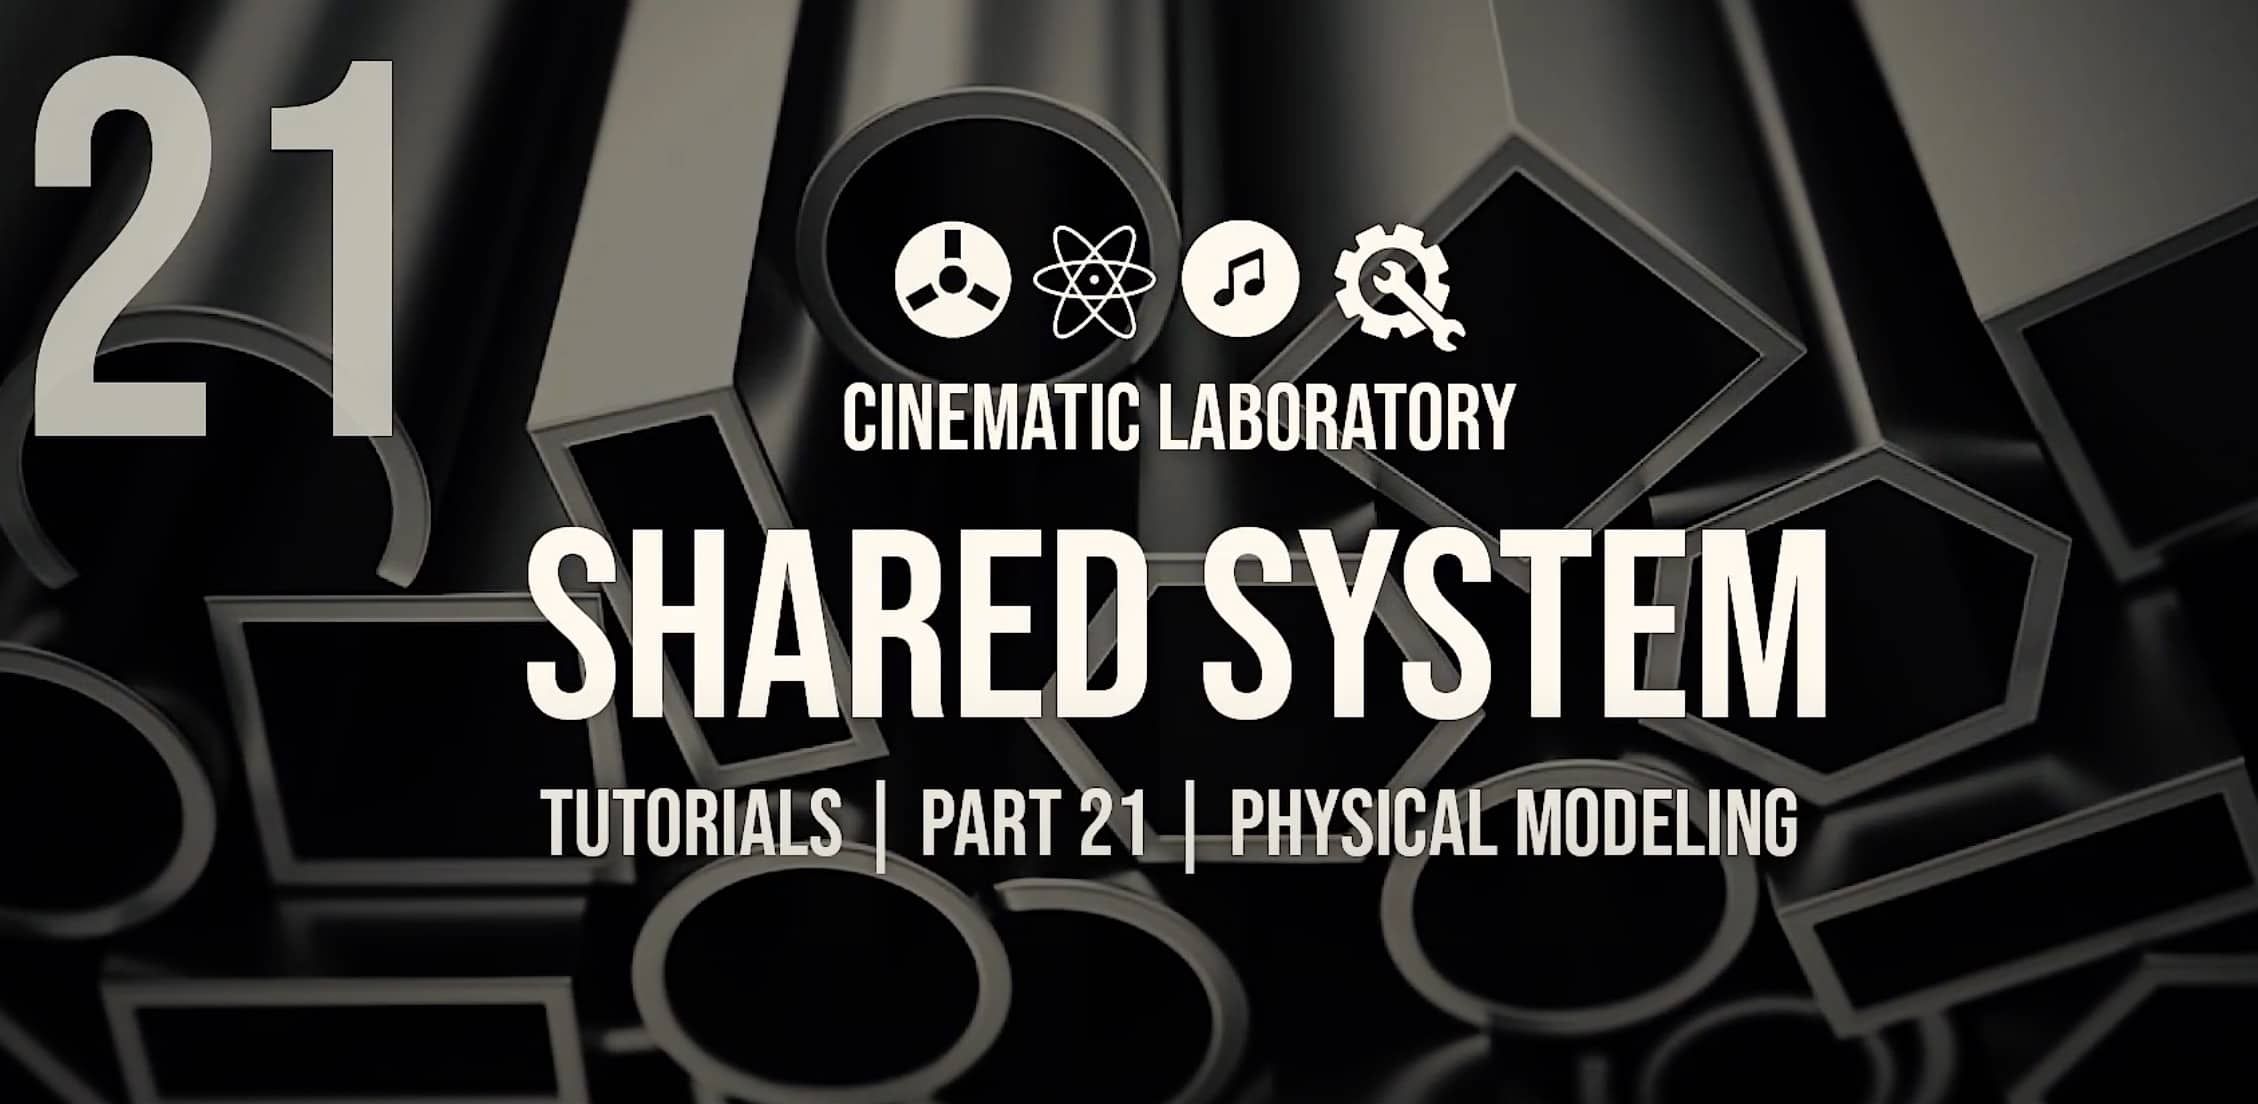 Shared-System-Tutorials-Part-21-Physical-Modeling